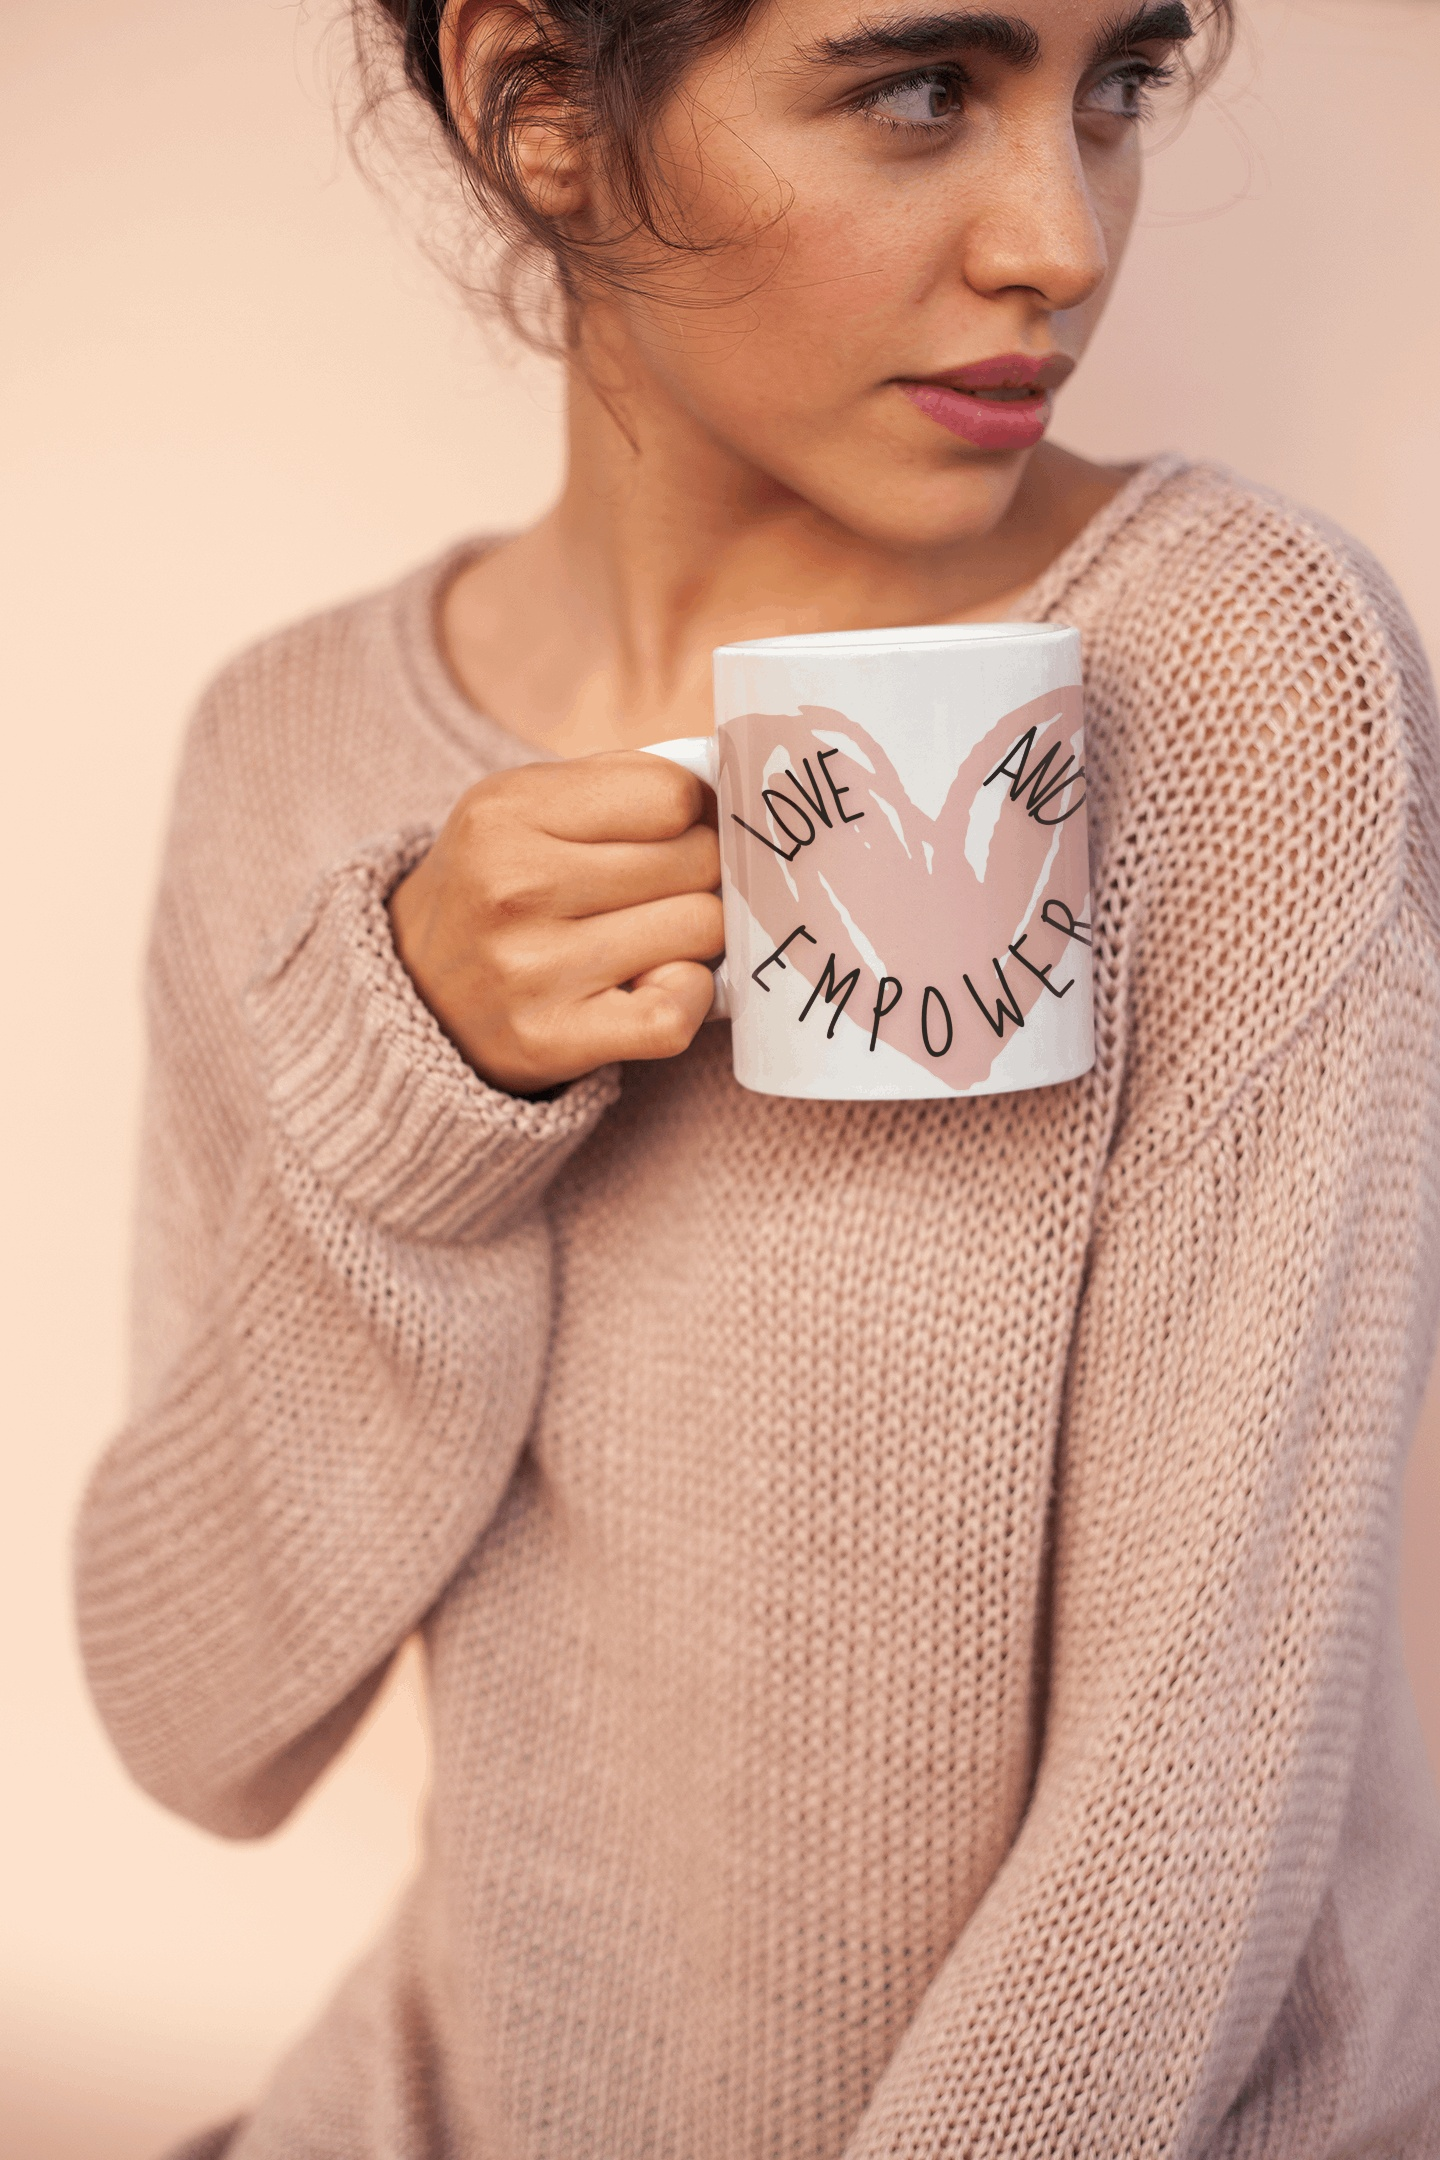 "Love and Empower" Inspirational Mug - Warmth and Motivation in Every Sip